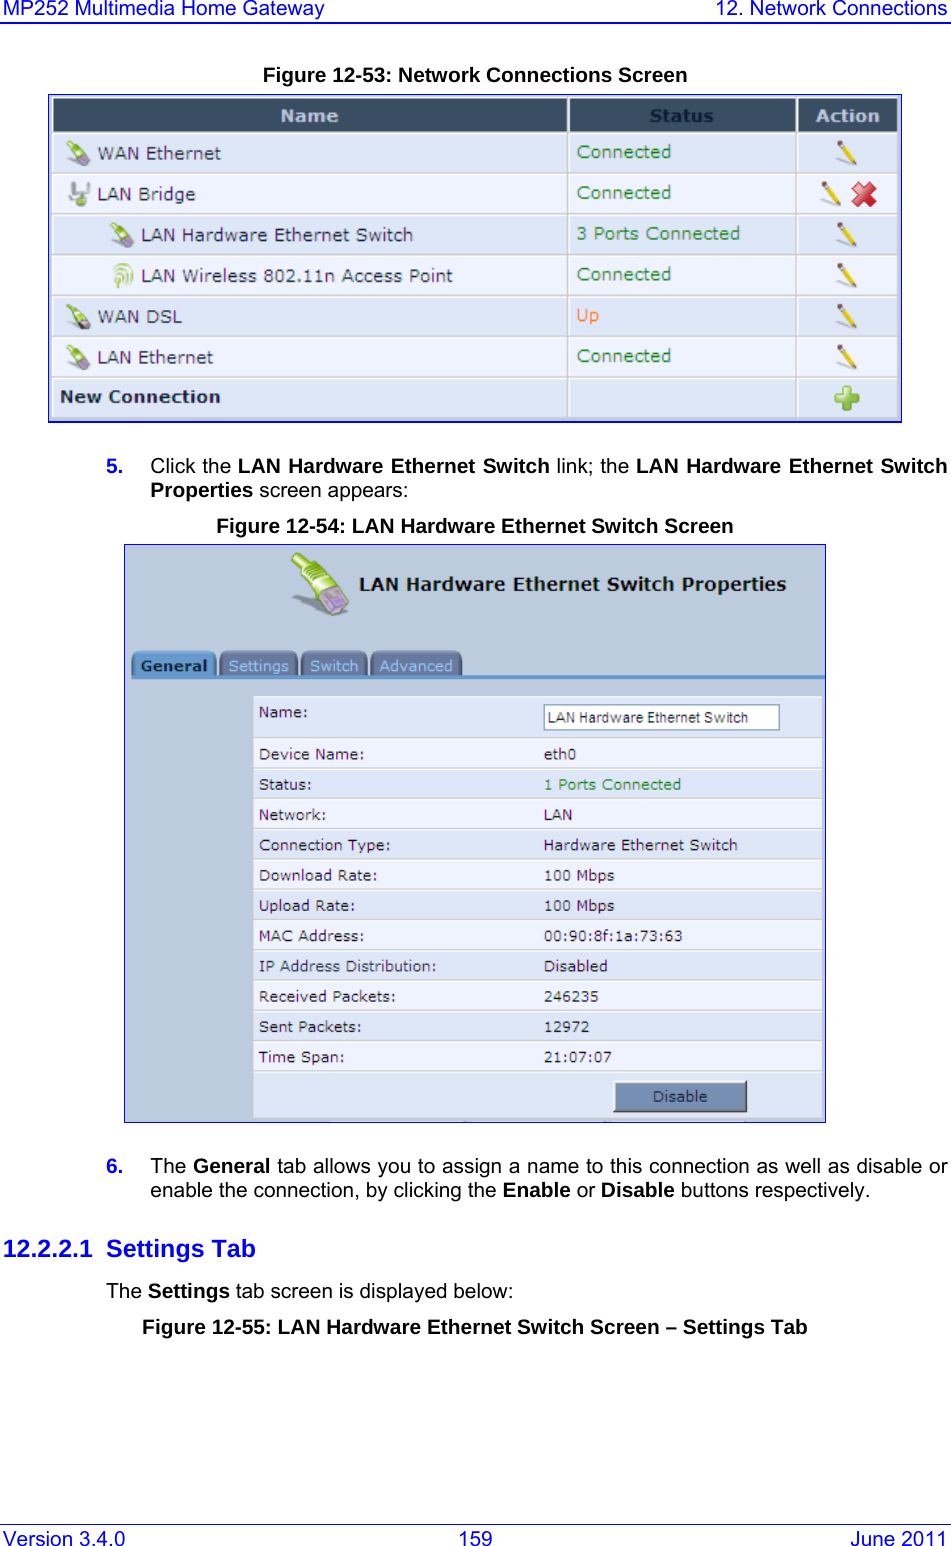 MP252 Multimedia Home Gateway  12. Network Connections Version 3.4.0  159  June 2011 Figure 12-53: Network Connections Screen  5.  Click the LAN Hardware Ethernet Switch link; the LAN Hardware Ethernet Switch  Properties screen appears: Figure 12-54: LAN Hardware Ethernet Switch Screen   6.  The General tab allows you to assign a name to this connection as well as disable or enable the connection, by clicking the Enable or Disable buttons respectively. 12.2.2.1 Settings Tab The Settings tab screen is displayed below: Figure 12-55: LAN Hardware Ethernet Switch Screen – Settings Tab 